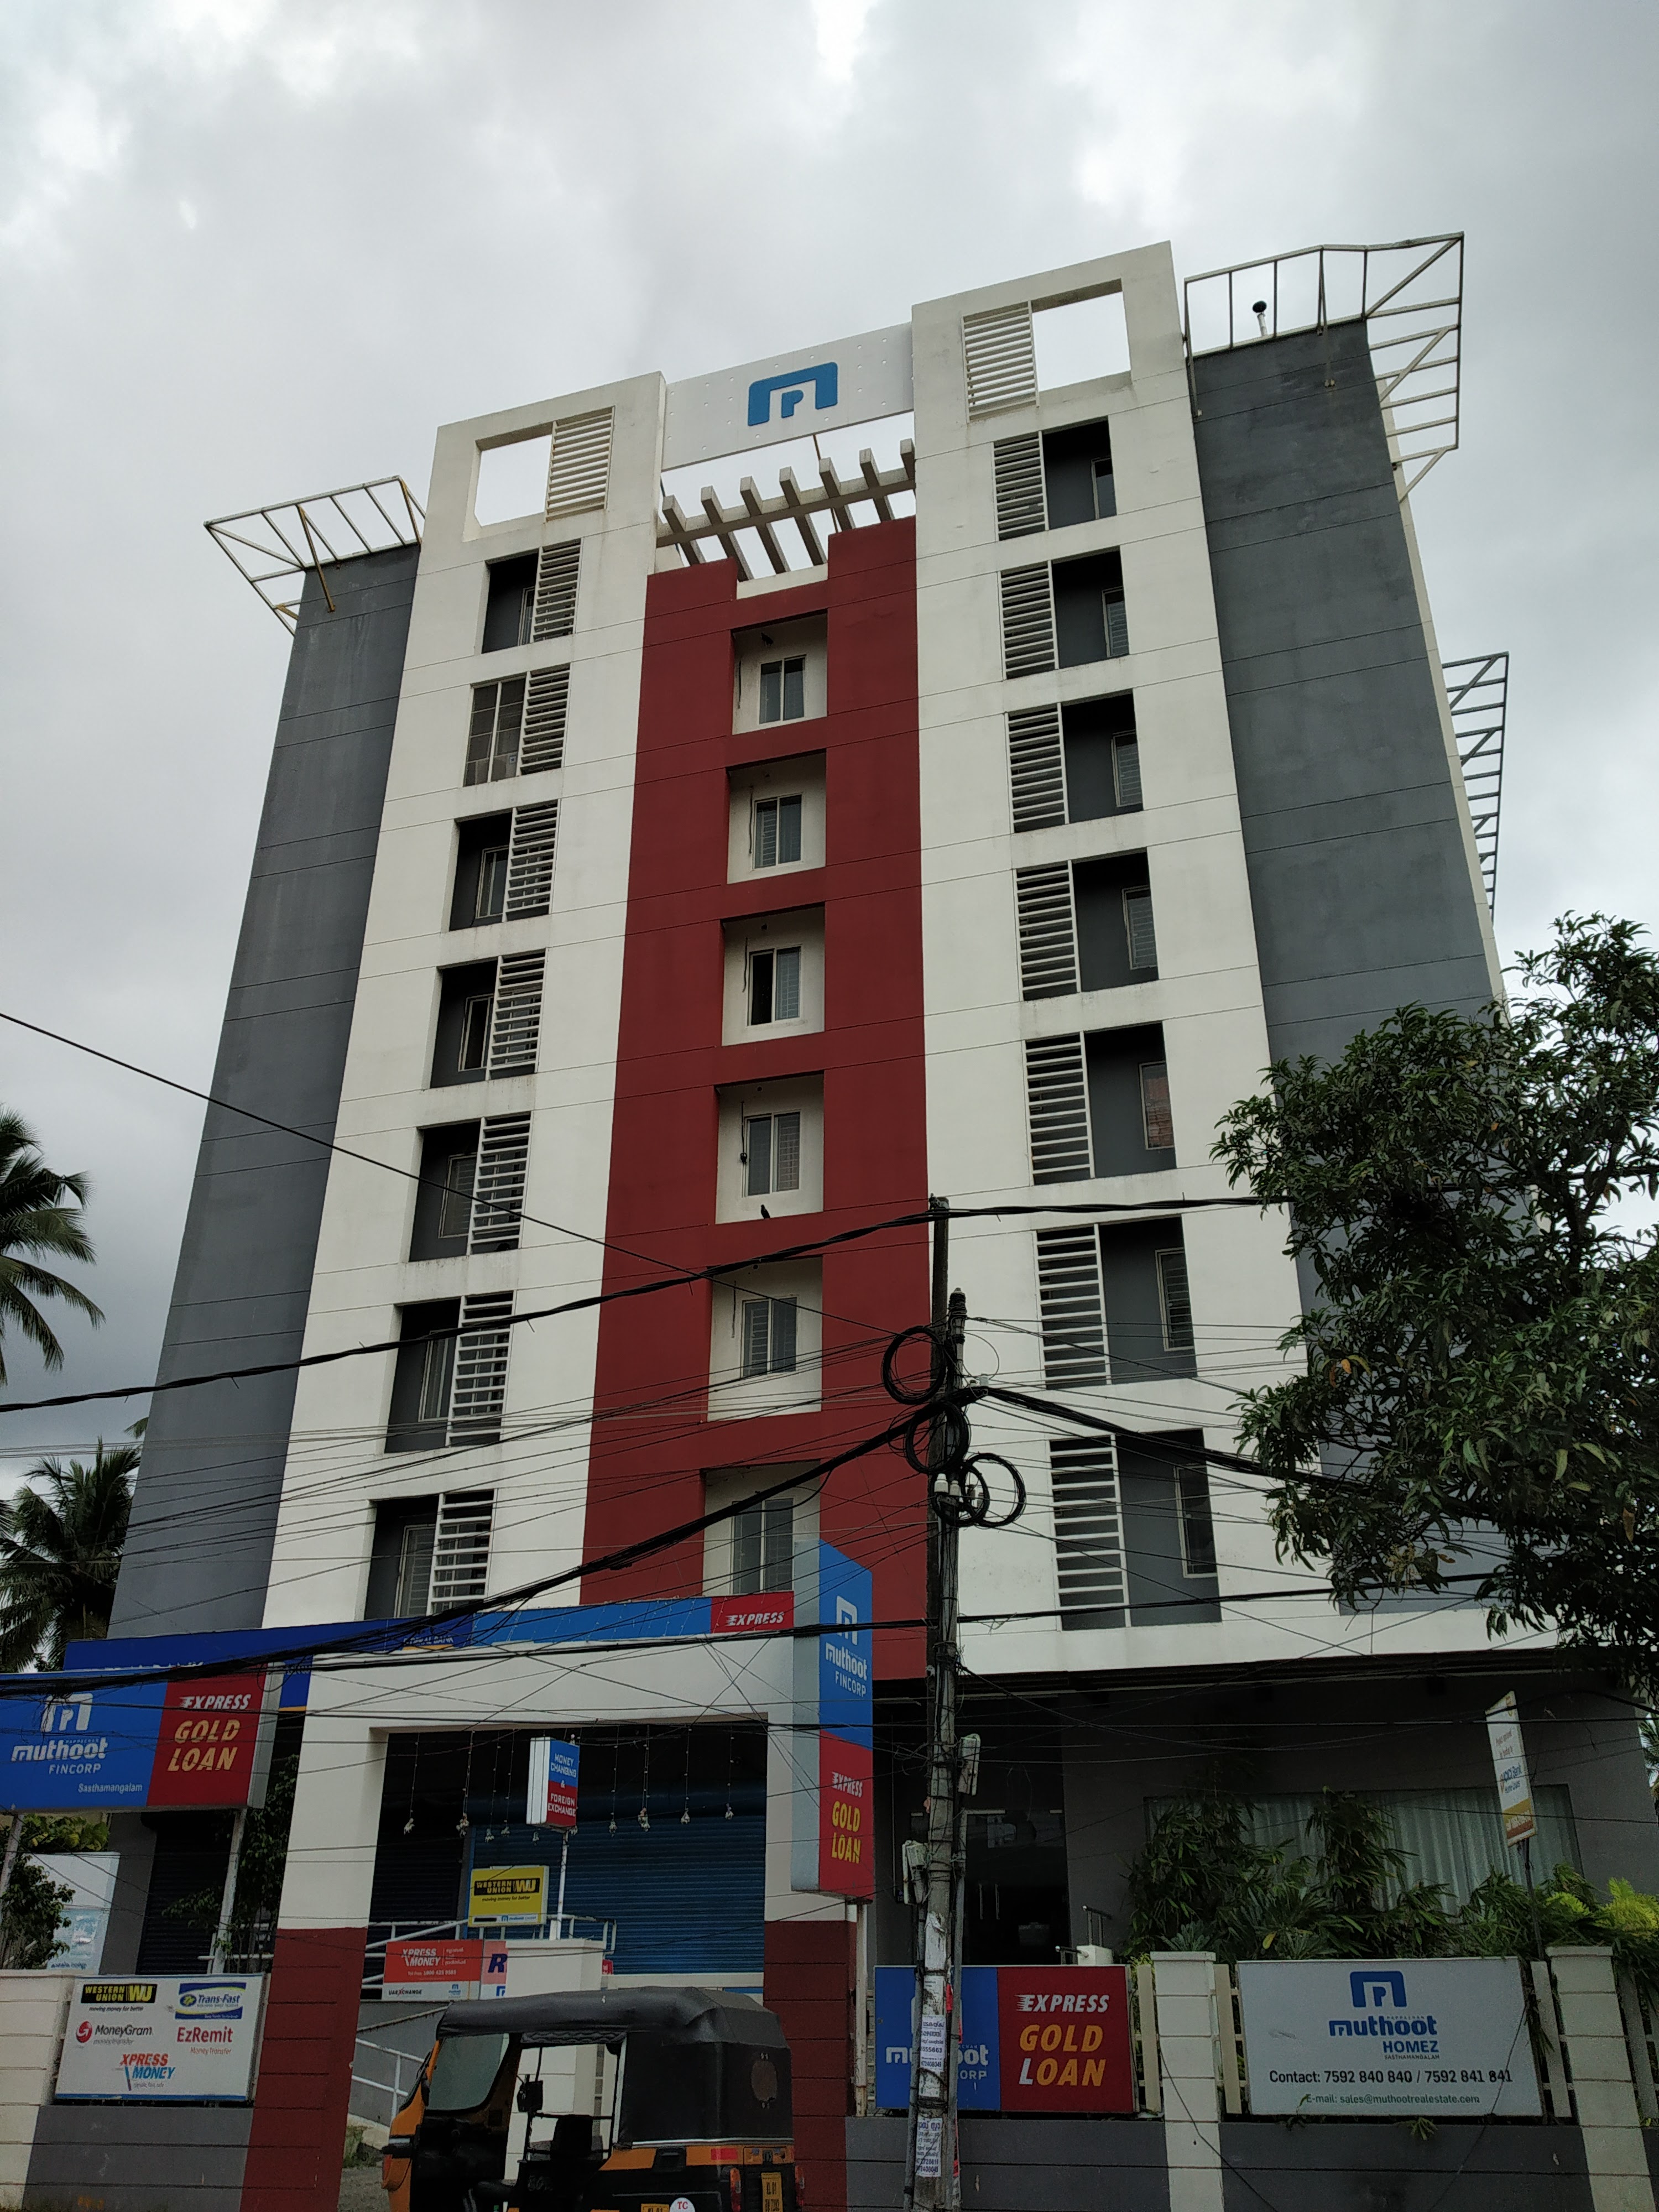 Photos and Videos of Muthoot Fincorp Gold Loan in Sasthamangalam, Thiruvananthapuram